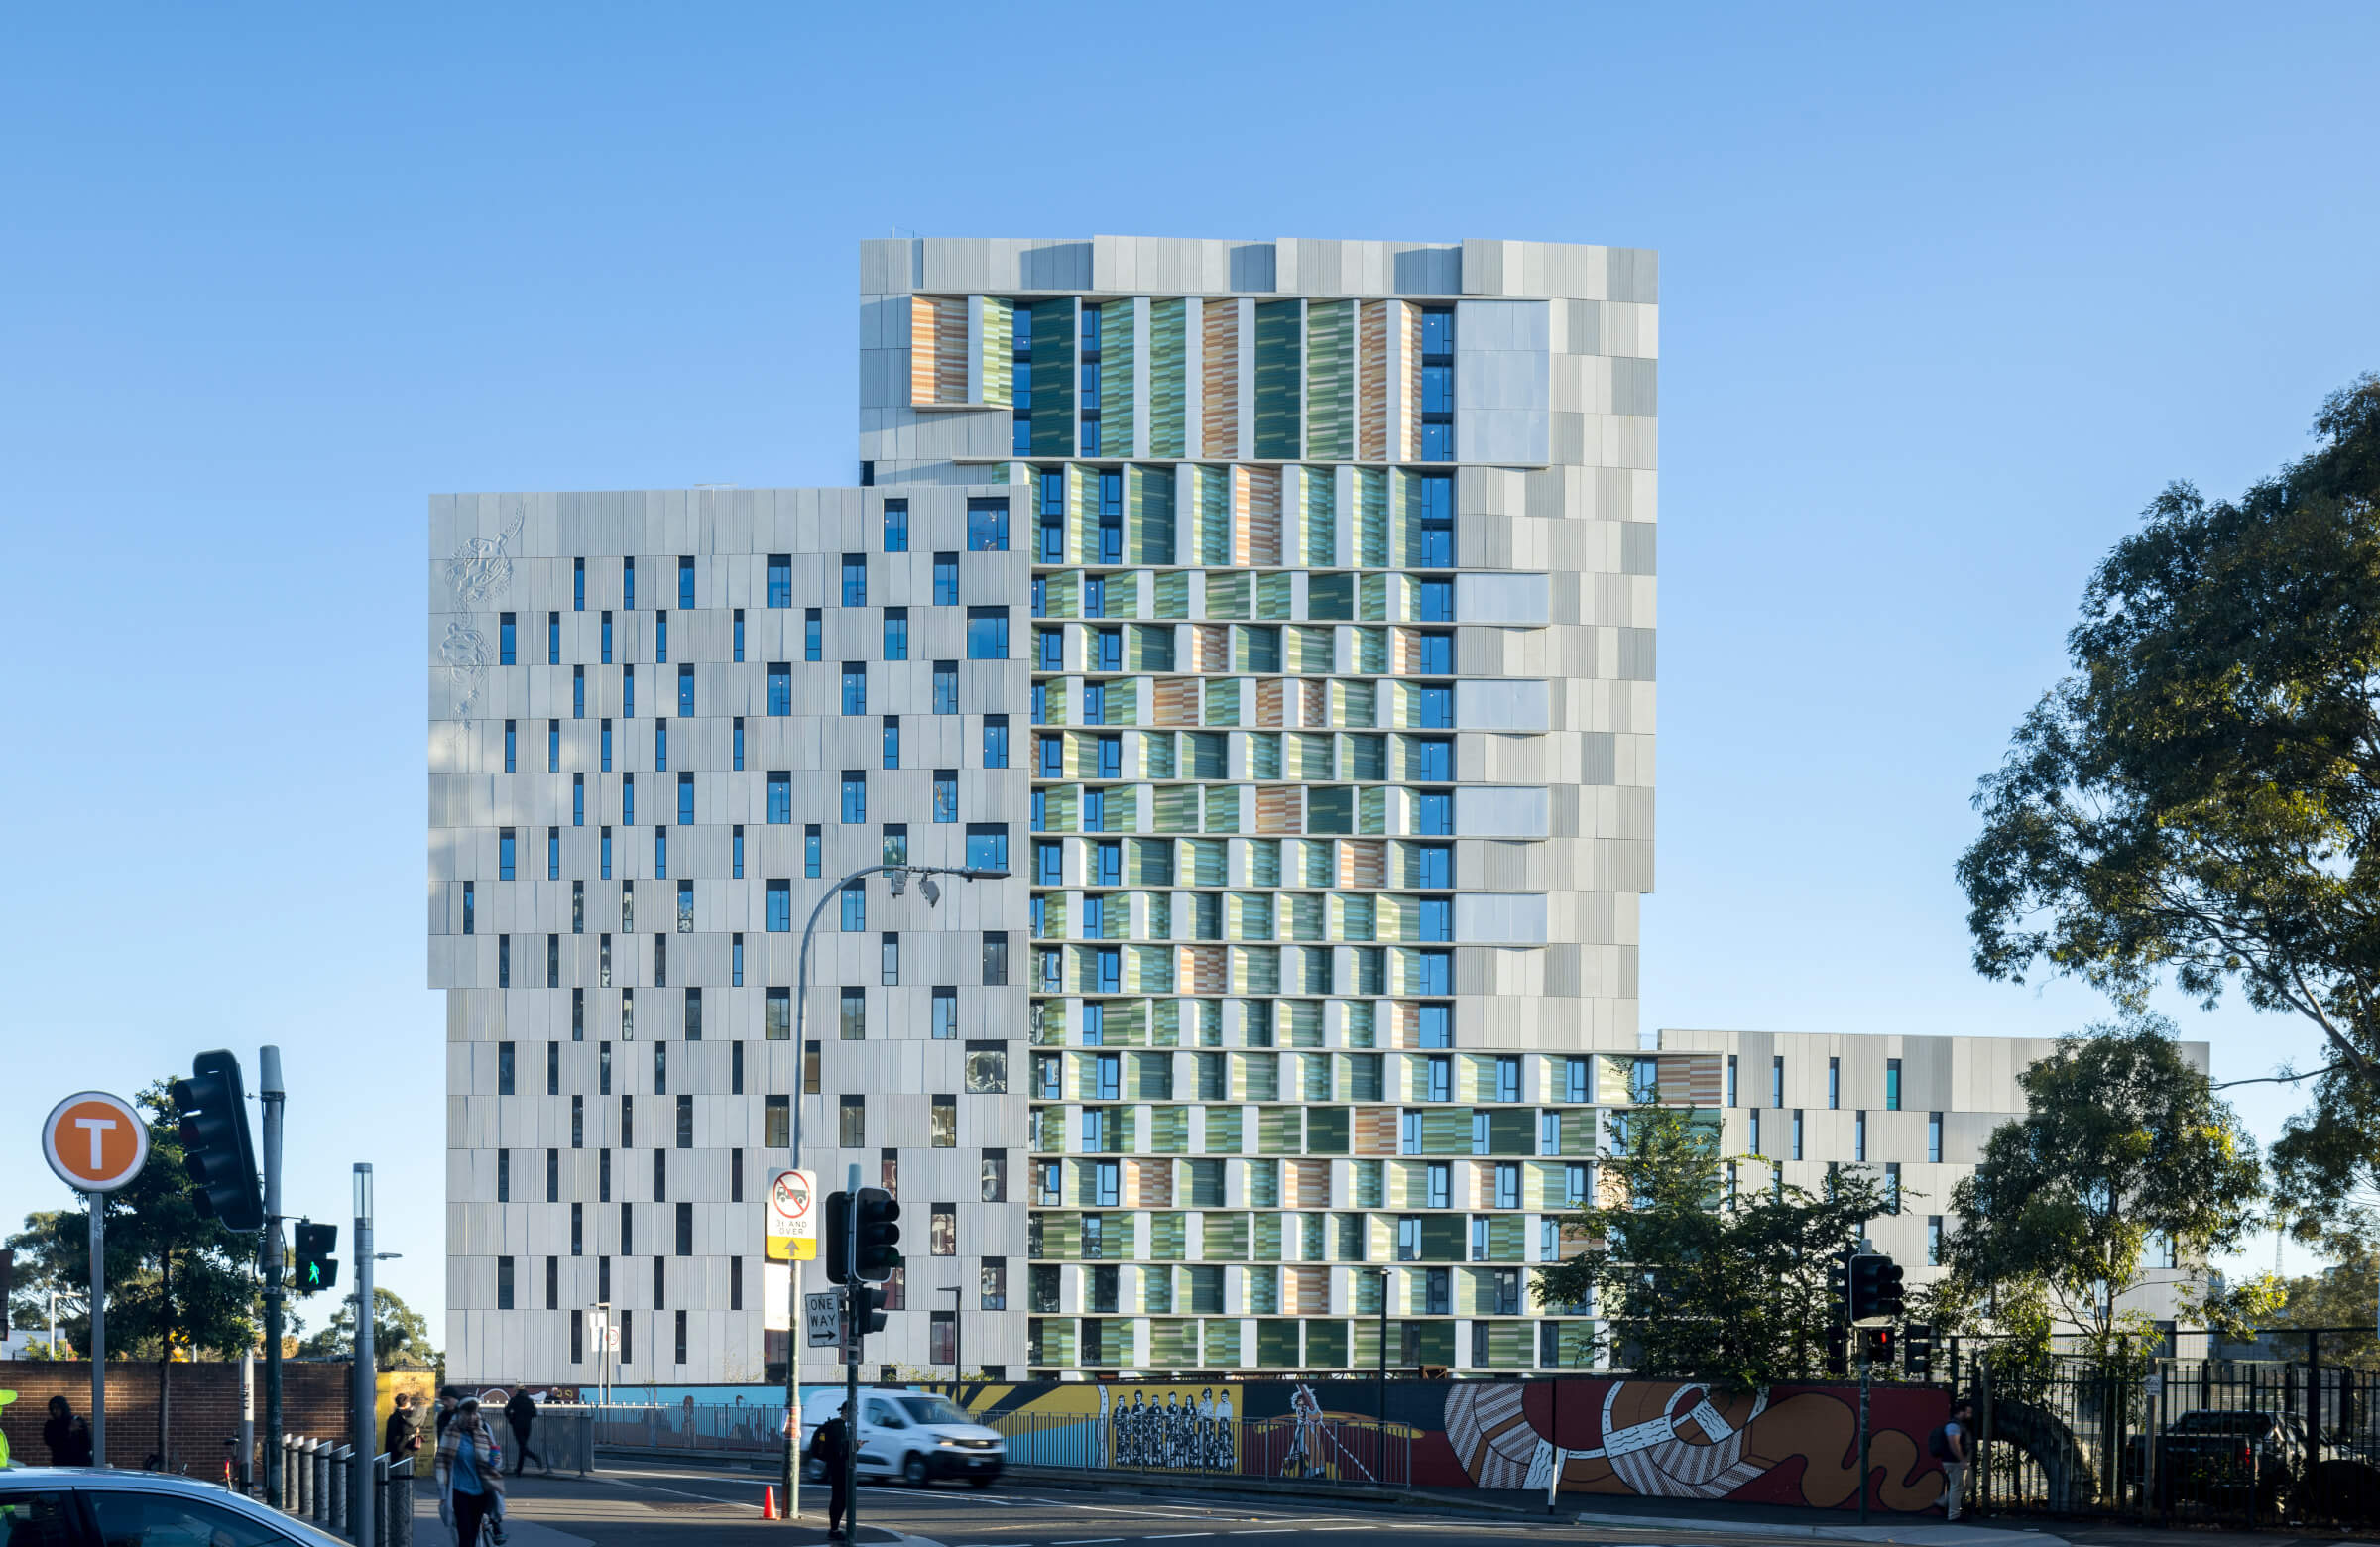 Terracotta facade of student housing - wide view showcasing sustainable and modern design